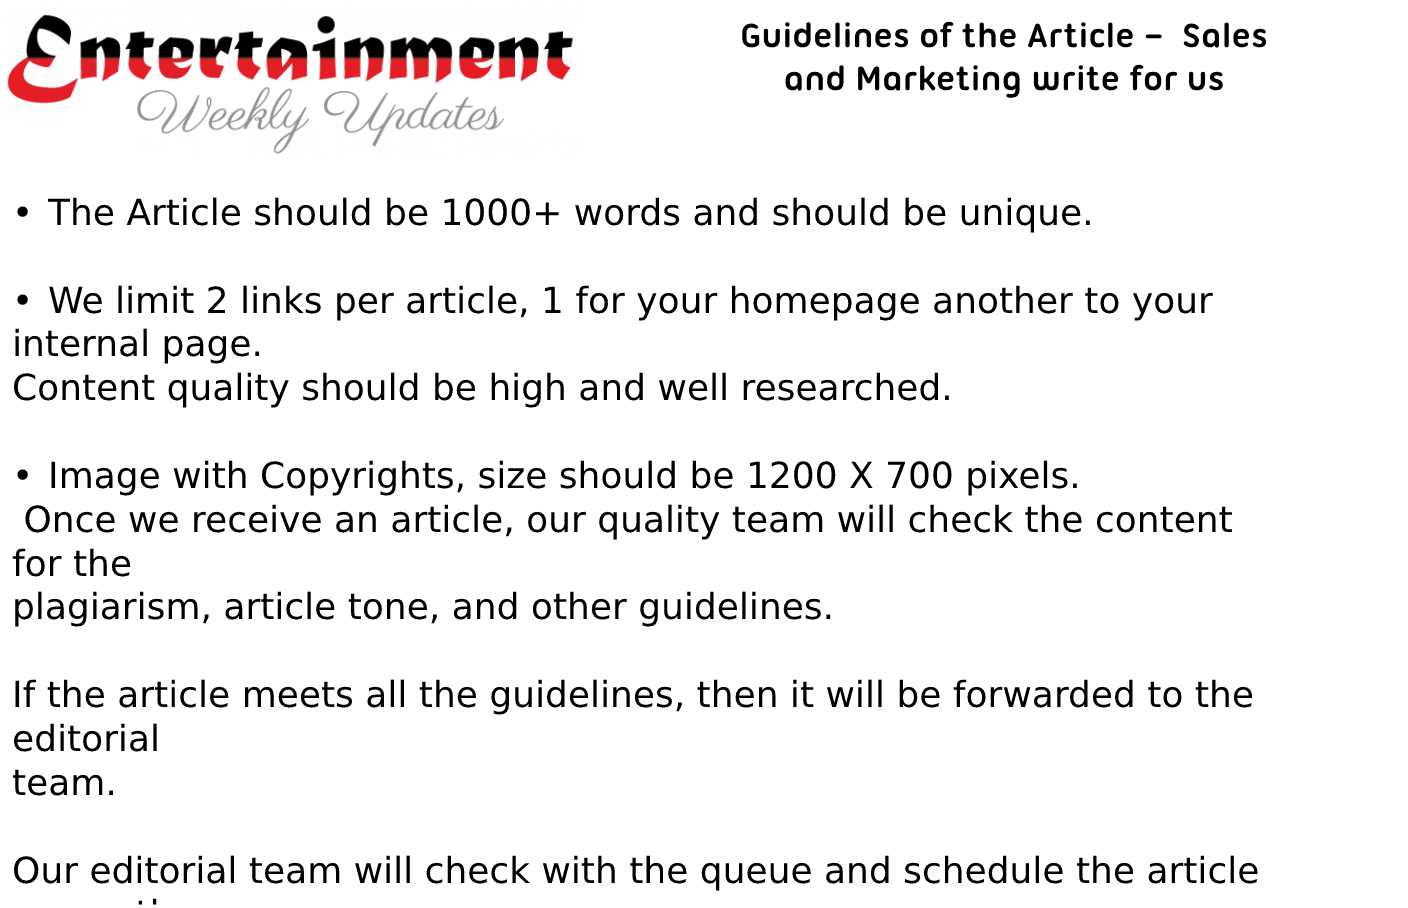 Guidelines of the Article –  Sales and Marketing write for us